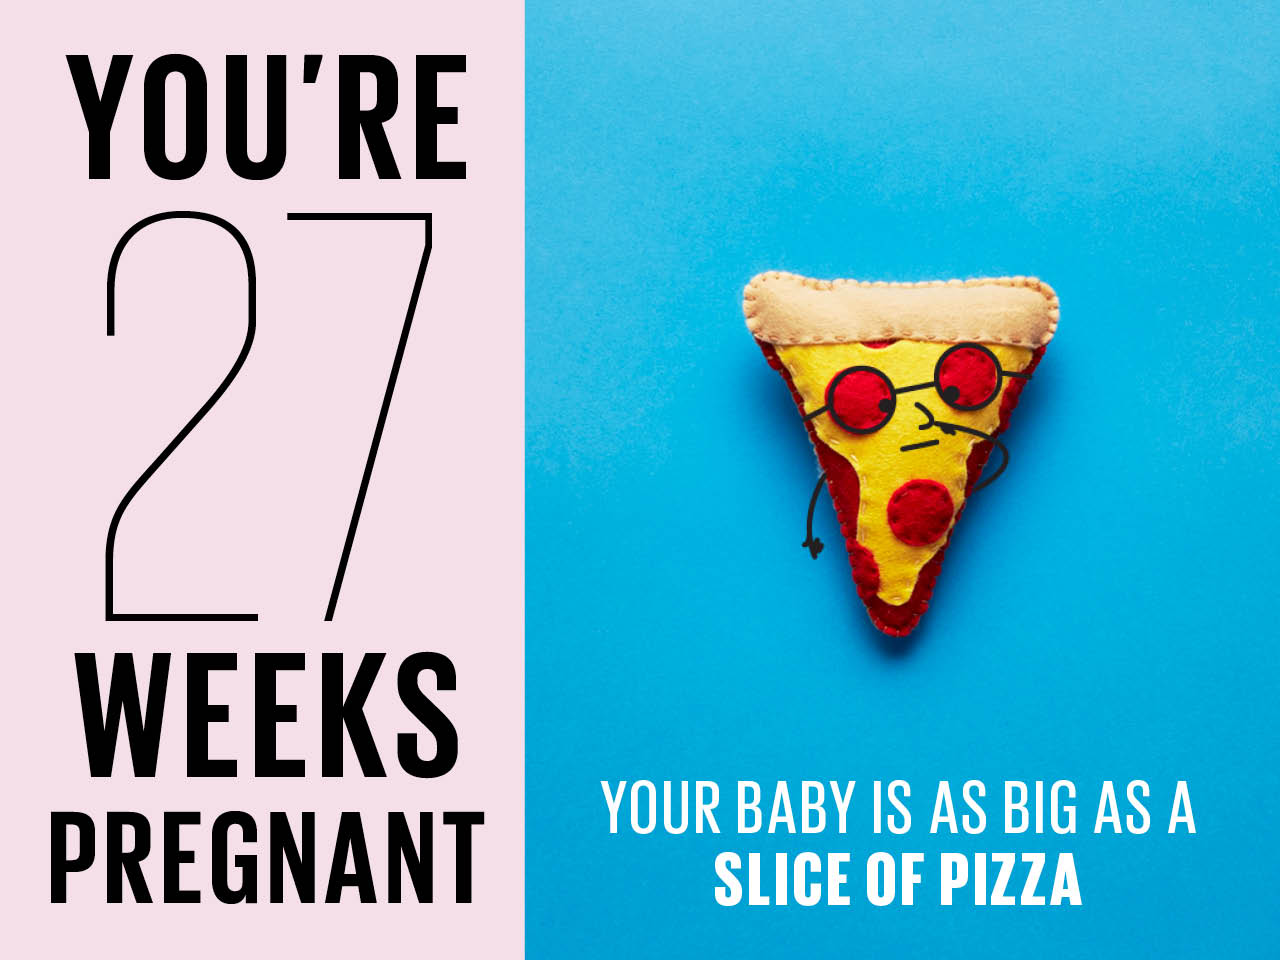 27 weeks pregnant symbolized by felt slice of pizza